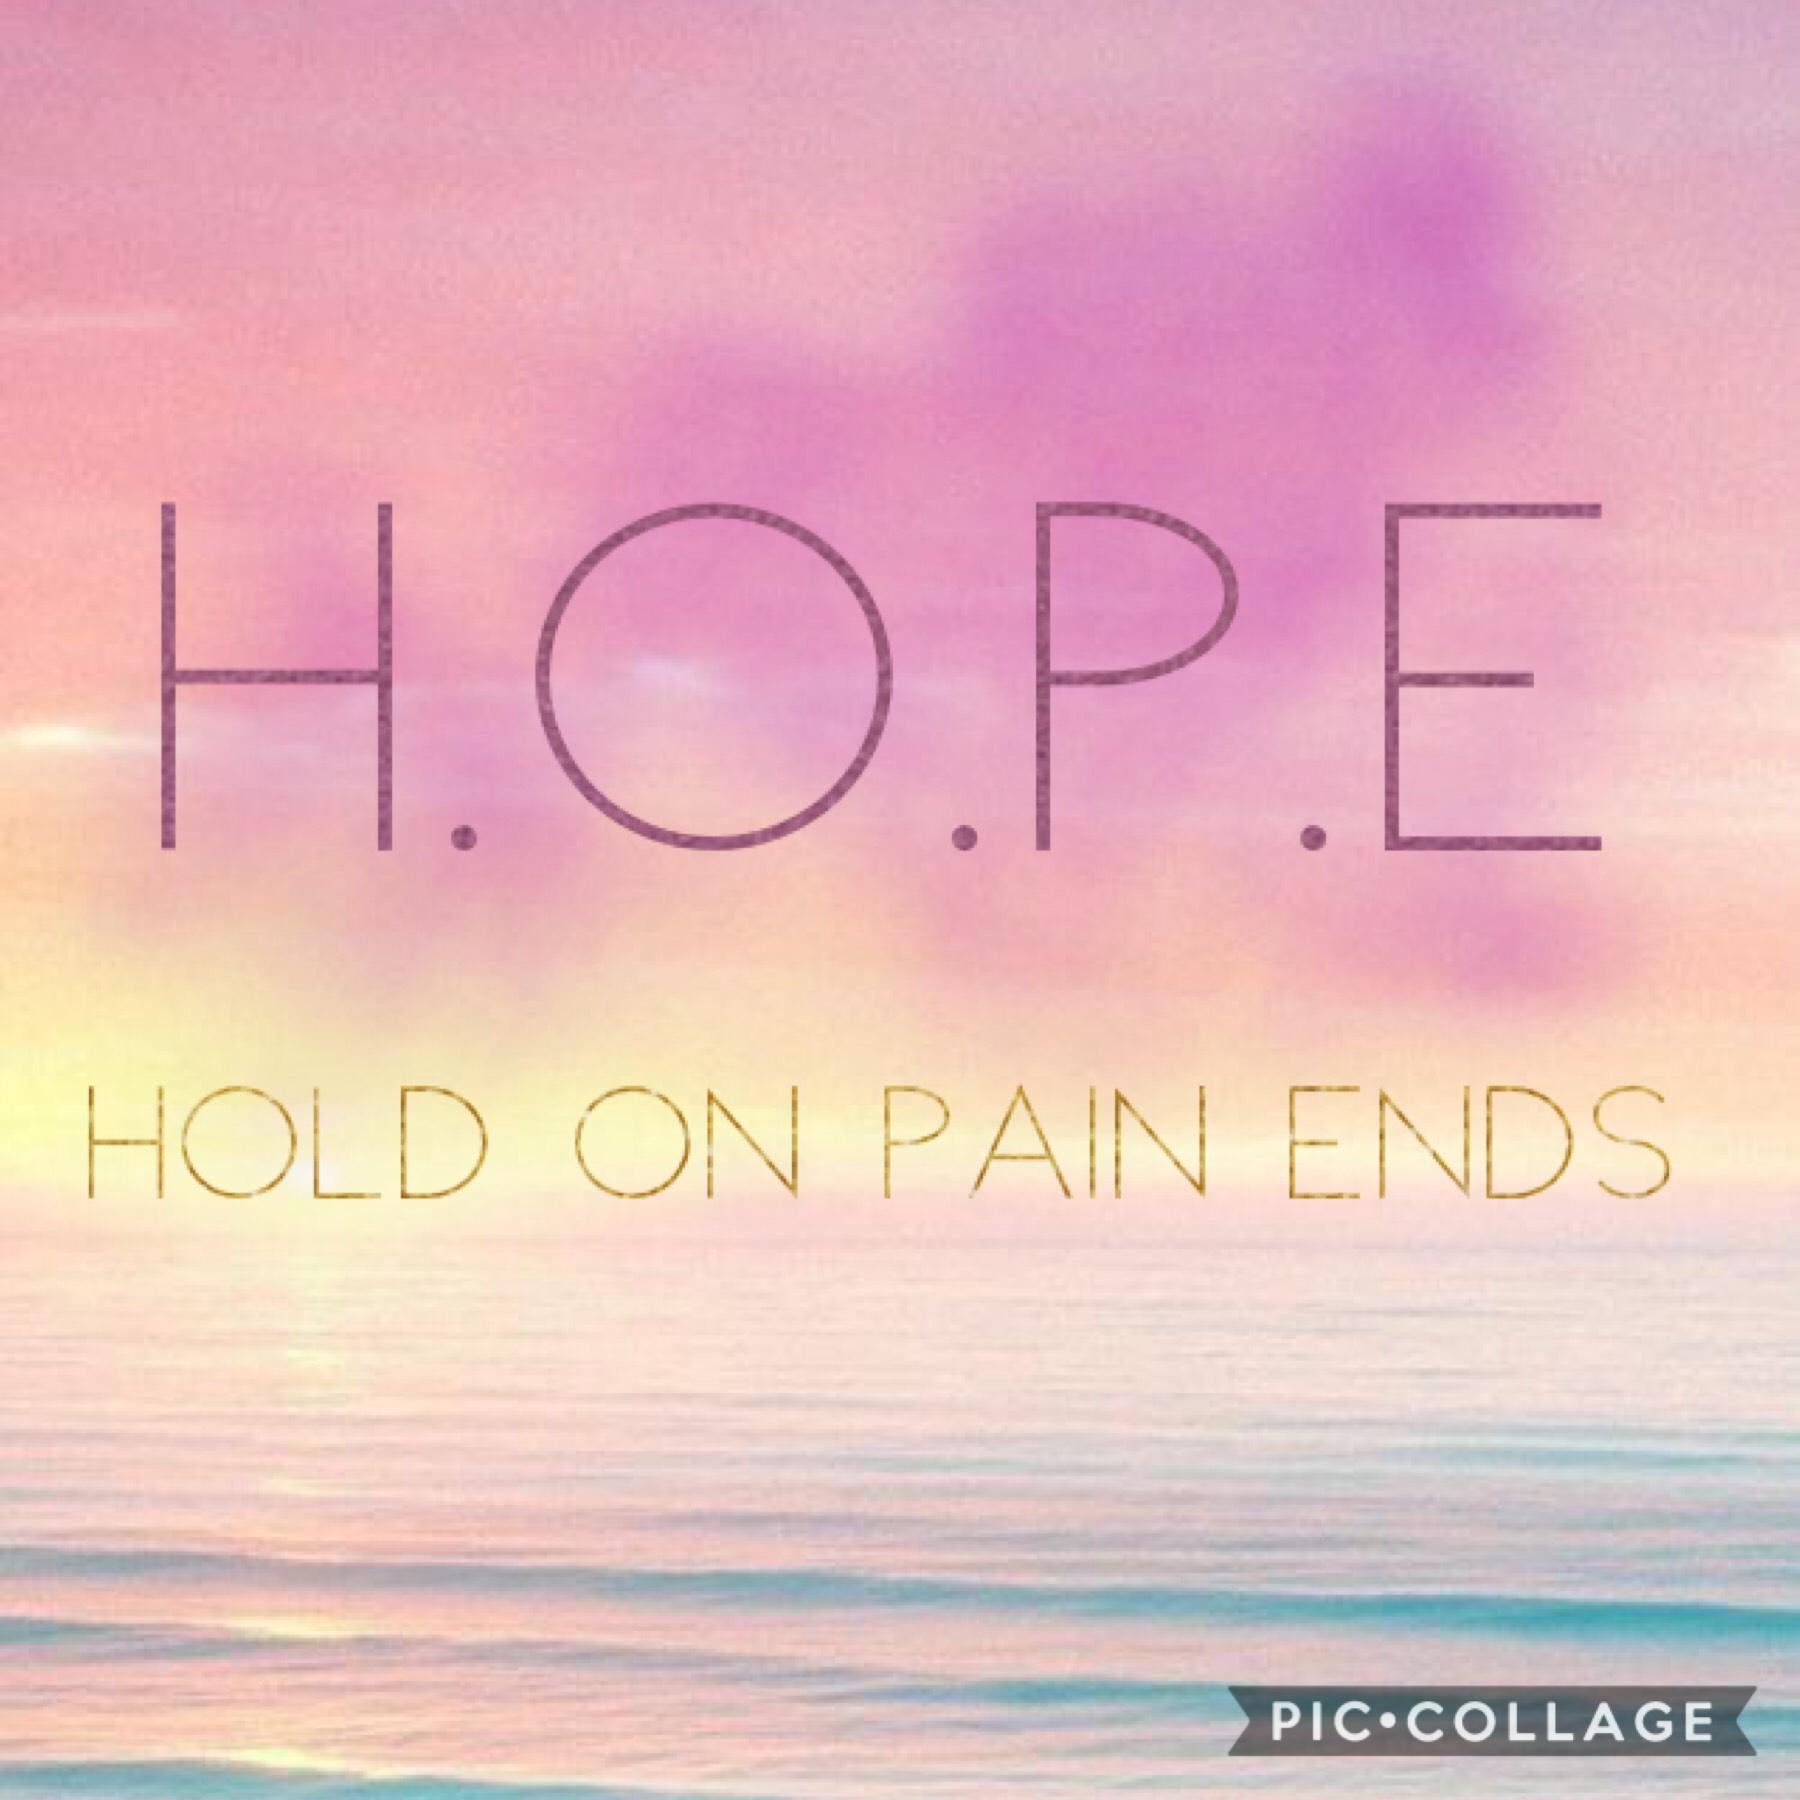 Hold On Pain Ends
It is not the end of the world; keep going it gets better